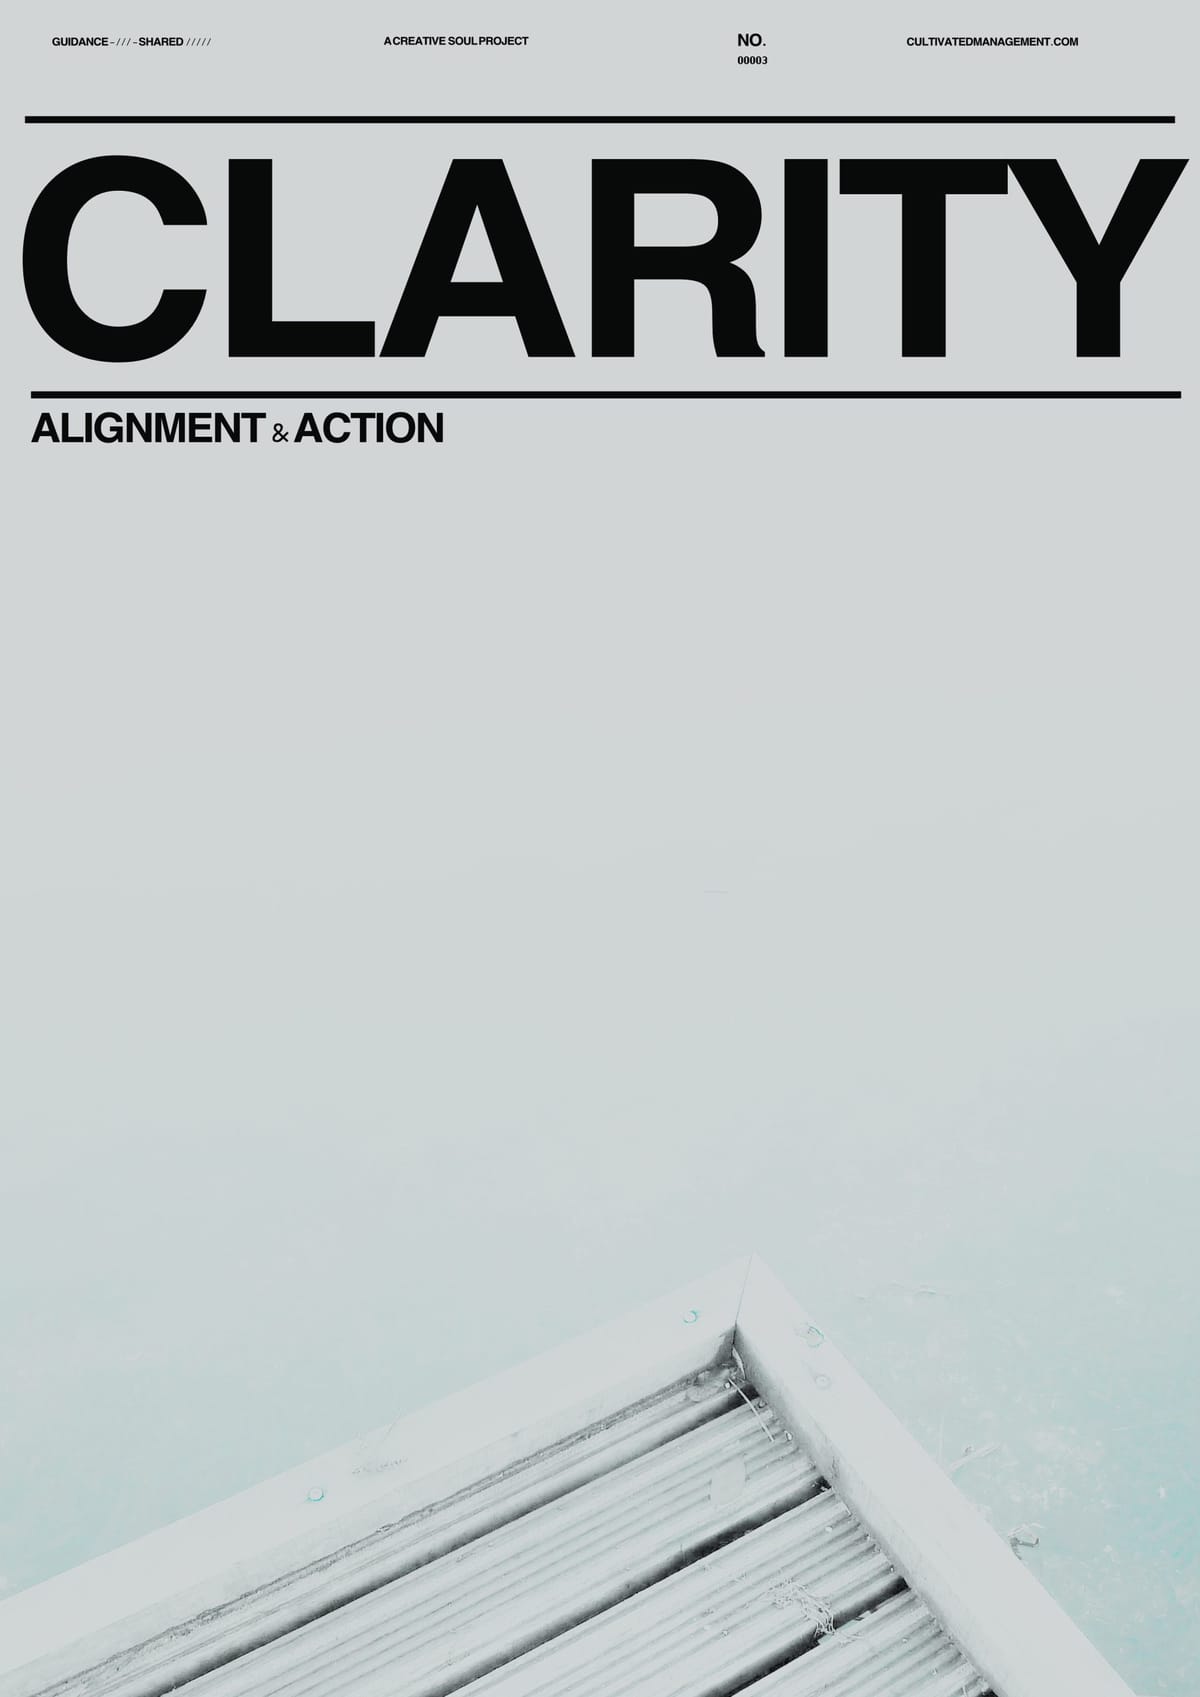 Clarity, Alignment and Action - 3 outstanding principles to get work done